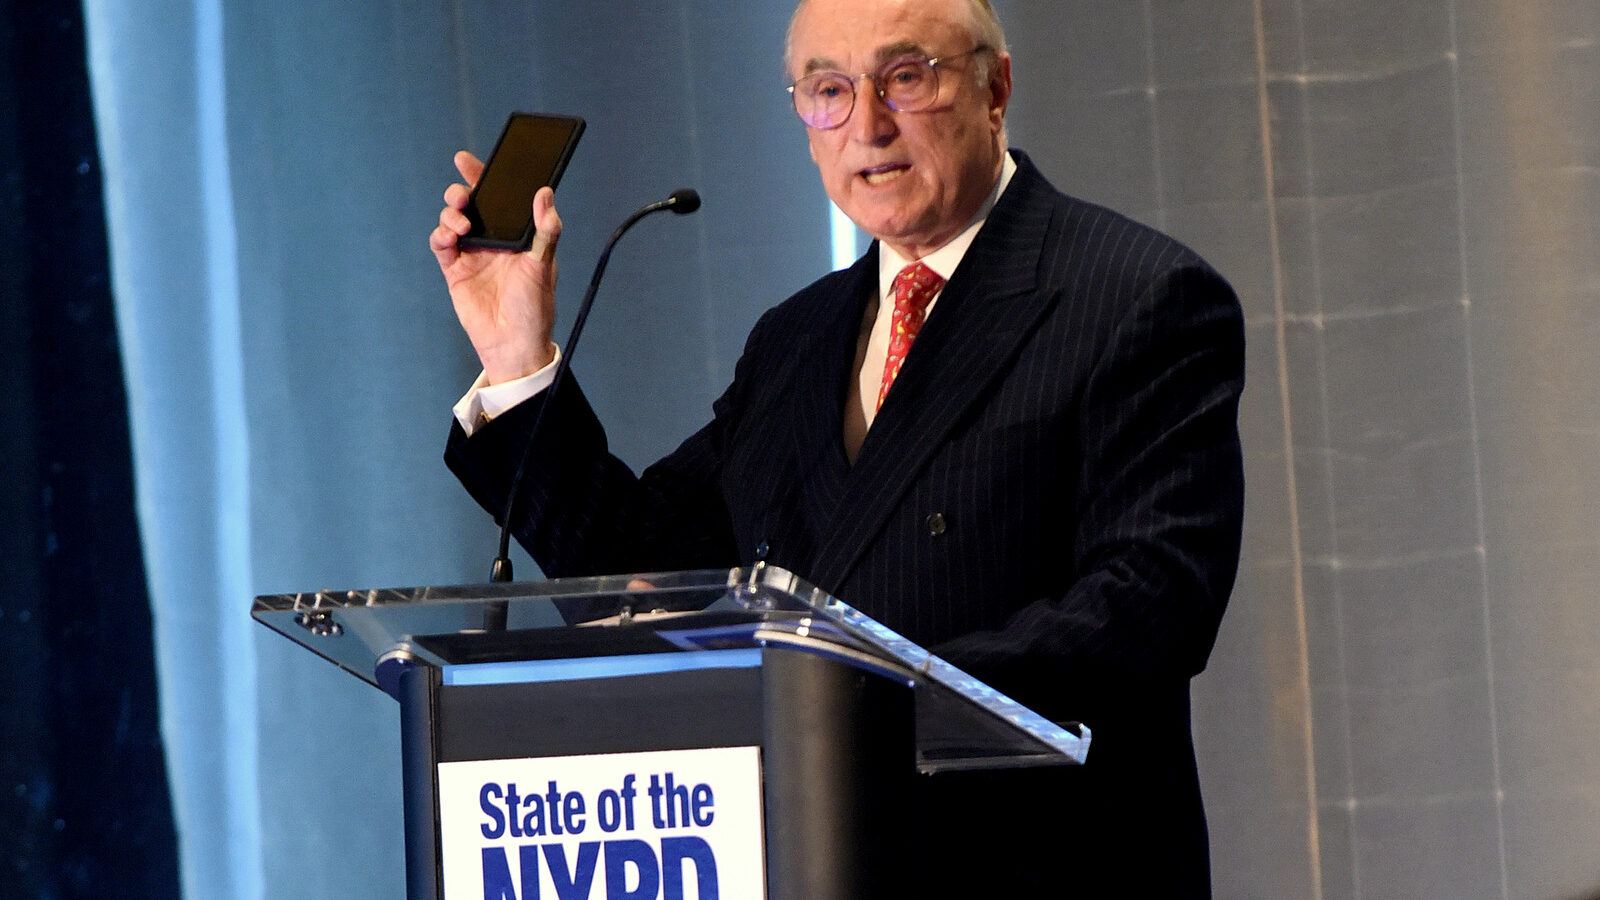 New York City Police Commissioner William J. Bratton announces that every police officer will be equipped with a smart phone by March 2016 during the New York City Police Foundation's "State of the NYPD" breakfast, Wednesday, Jan. 20, 2016, in New York. (Diane Bondareff/AP Images for New York City Police Foundation)